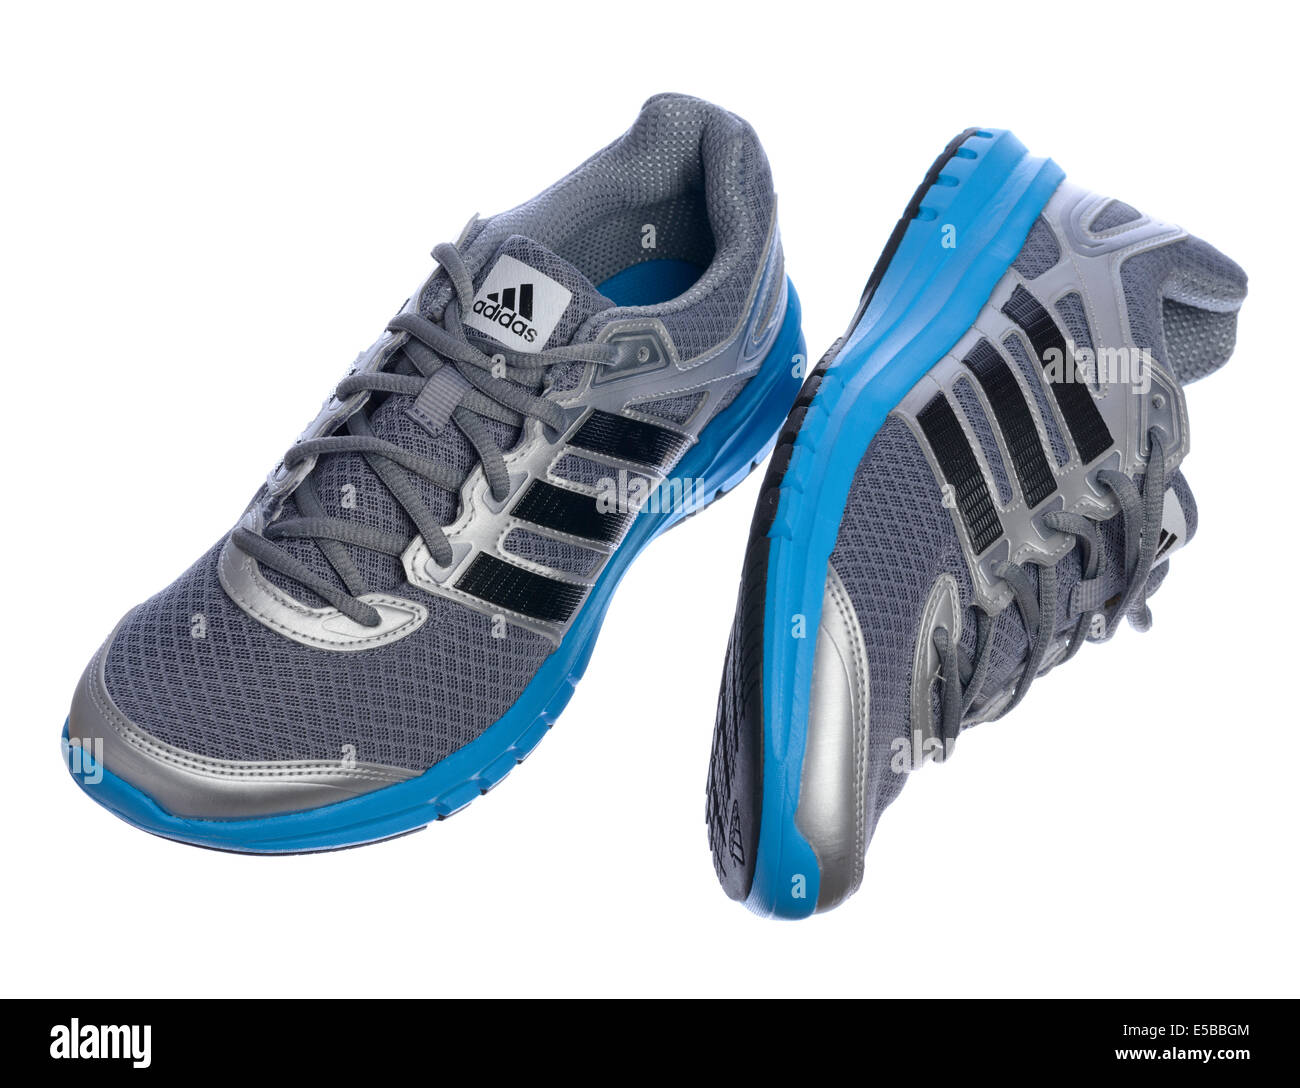 Silver and blue Adidas running shoes Stock Photo